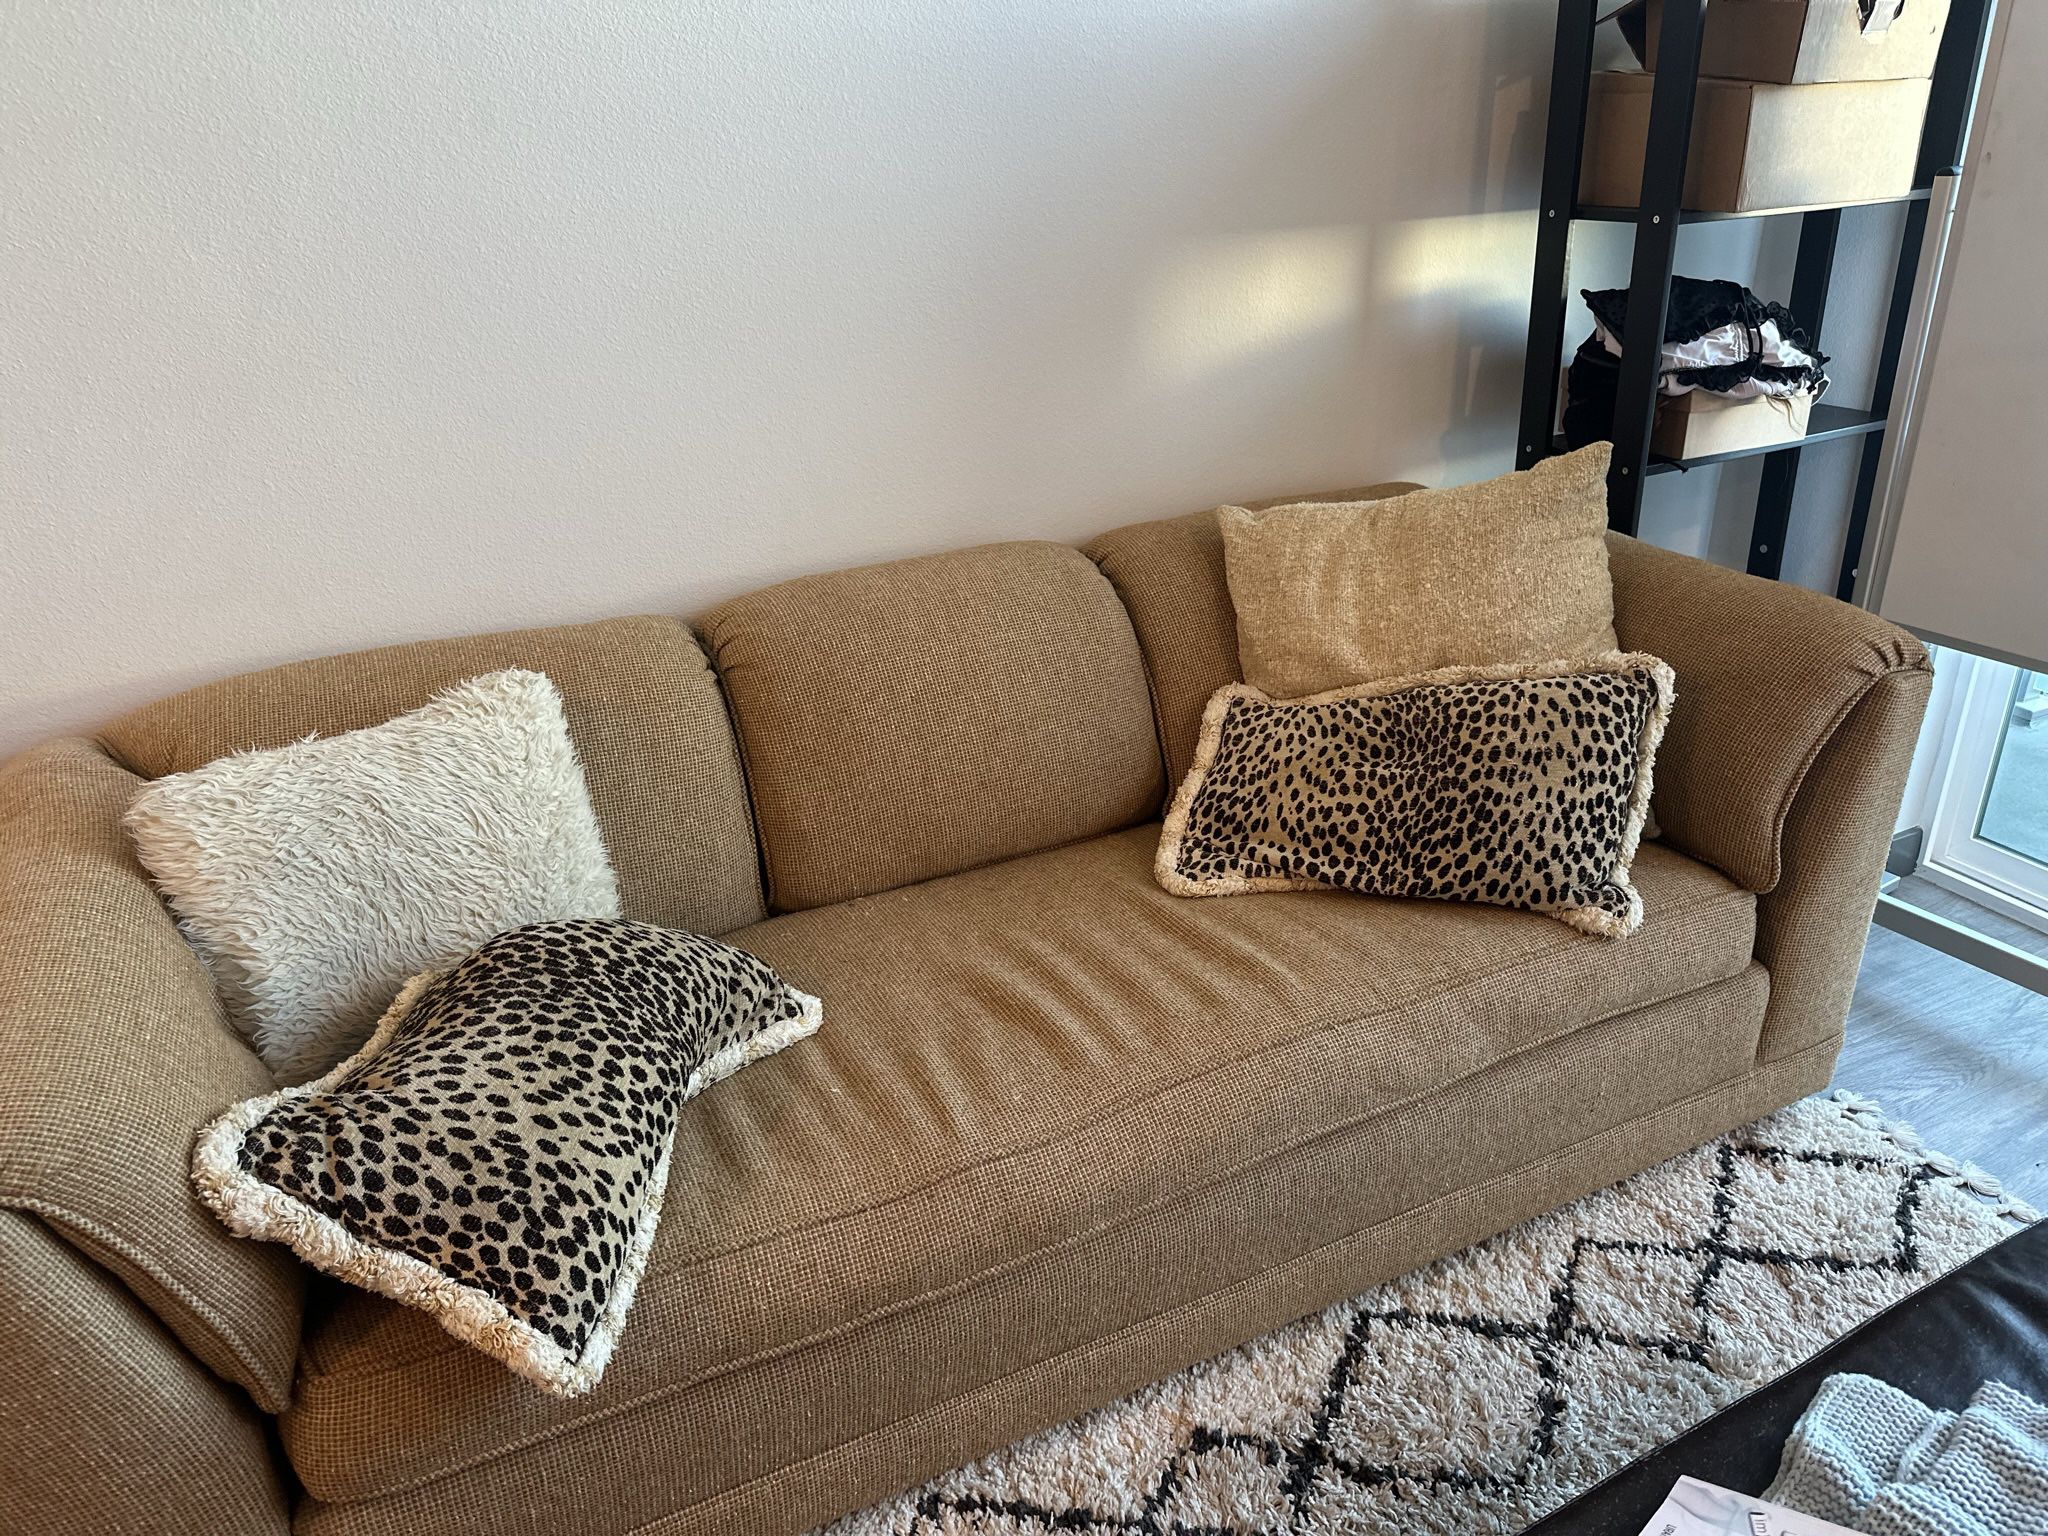 Tan Coral couch